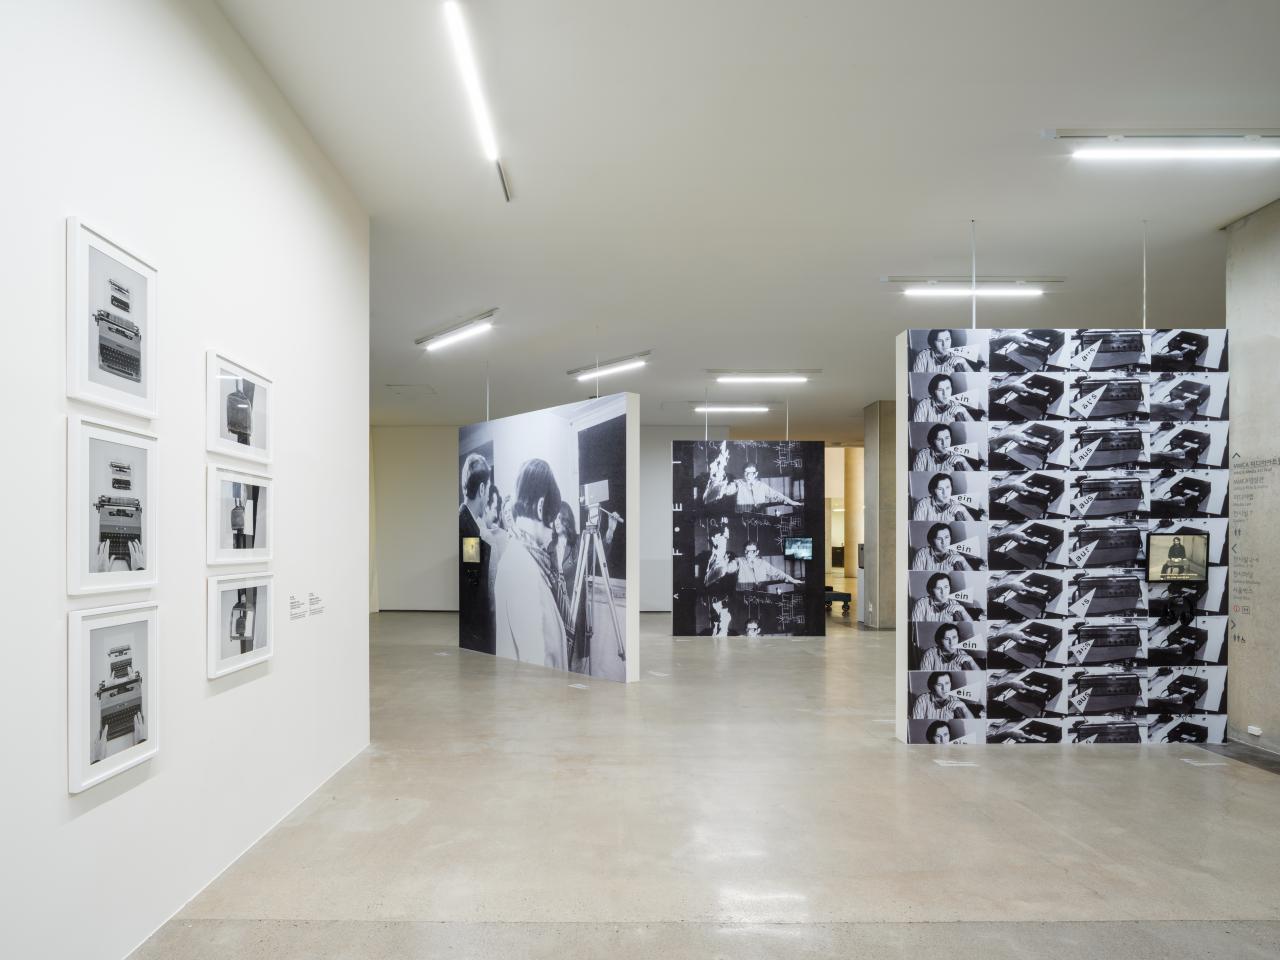 You can see an exhibition space. Three large black and white pictures divide the room. On the left wall hang 6 black and white photographs in white picture frames.